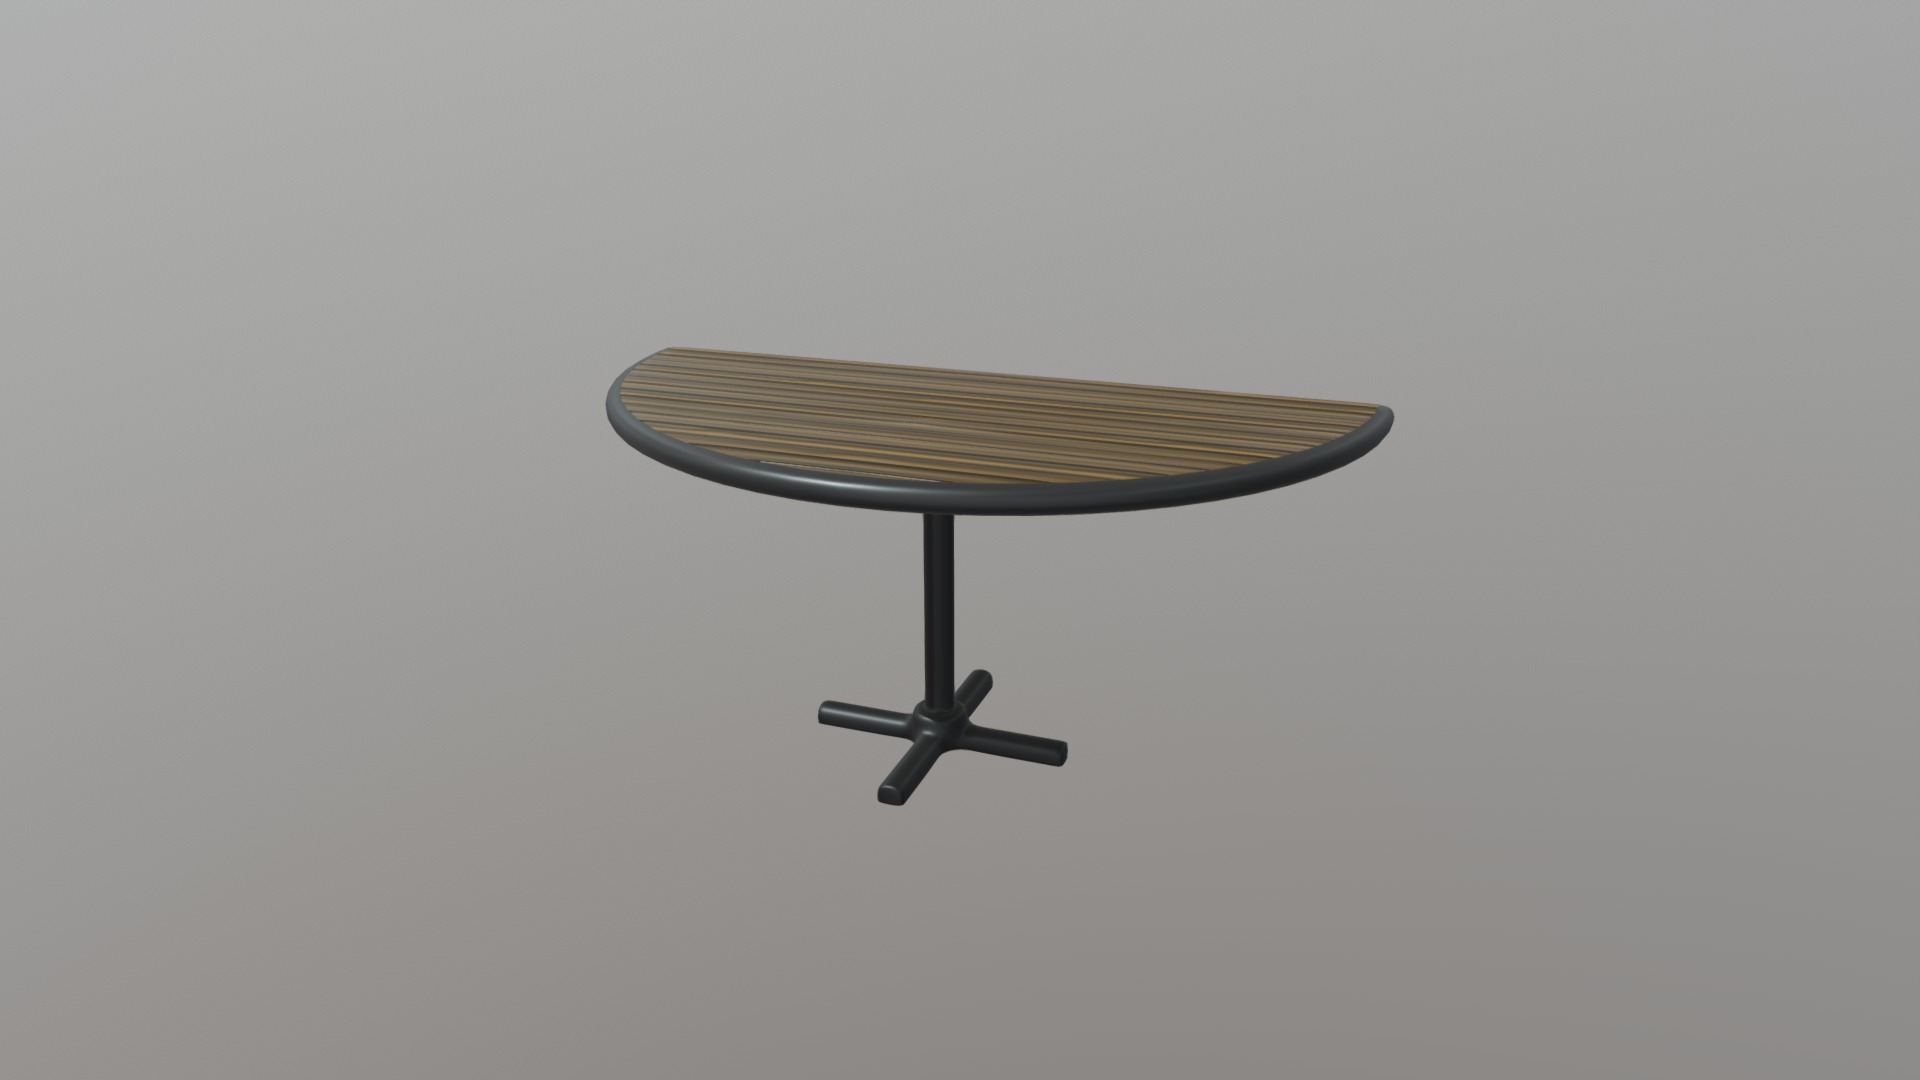 3D model Restaurant Semi Circle Table - This is a 3D model of the Restaurant Semi Circle Table. The 3D model is about a table with a lamp shade.